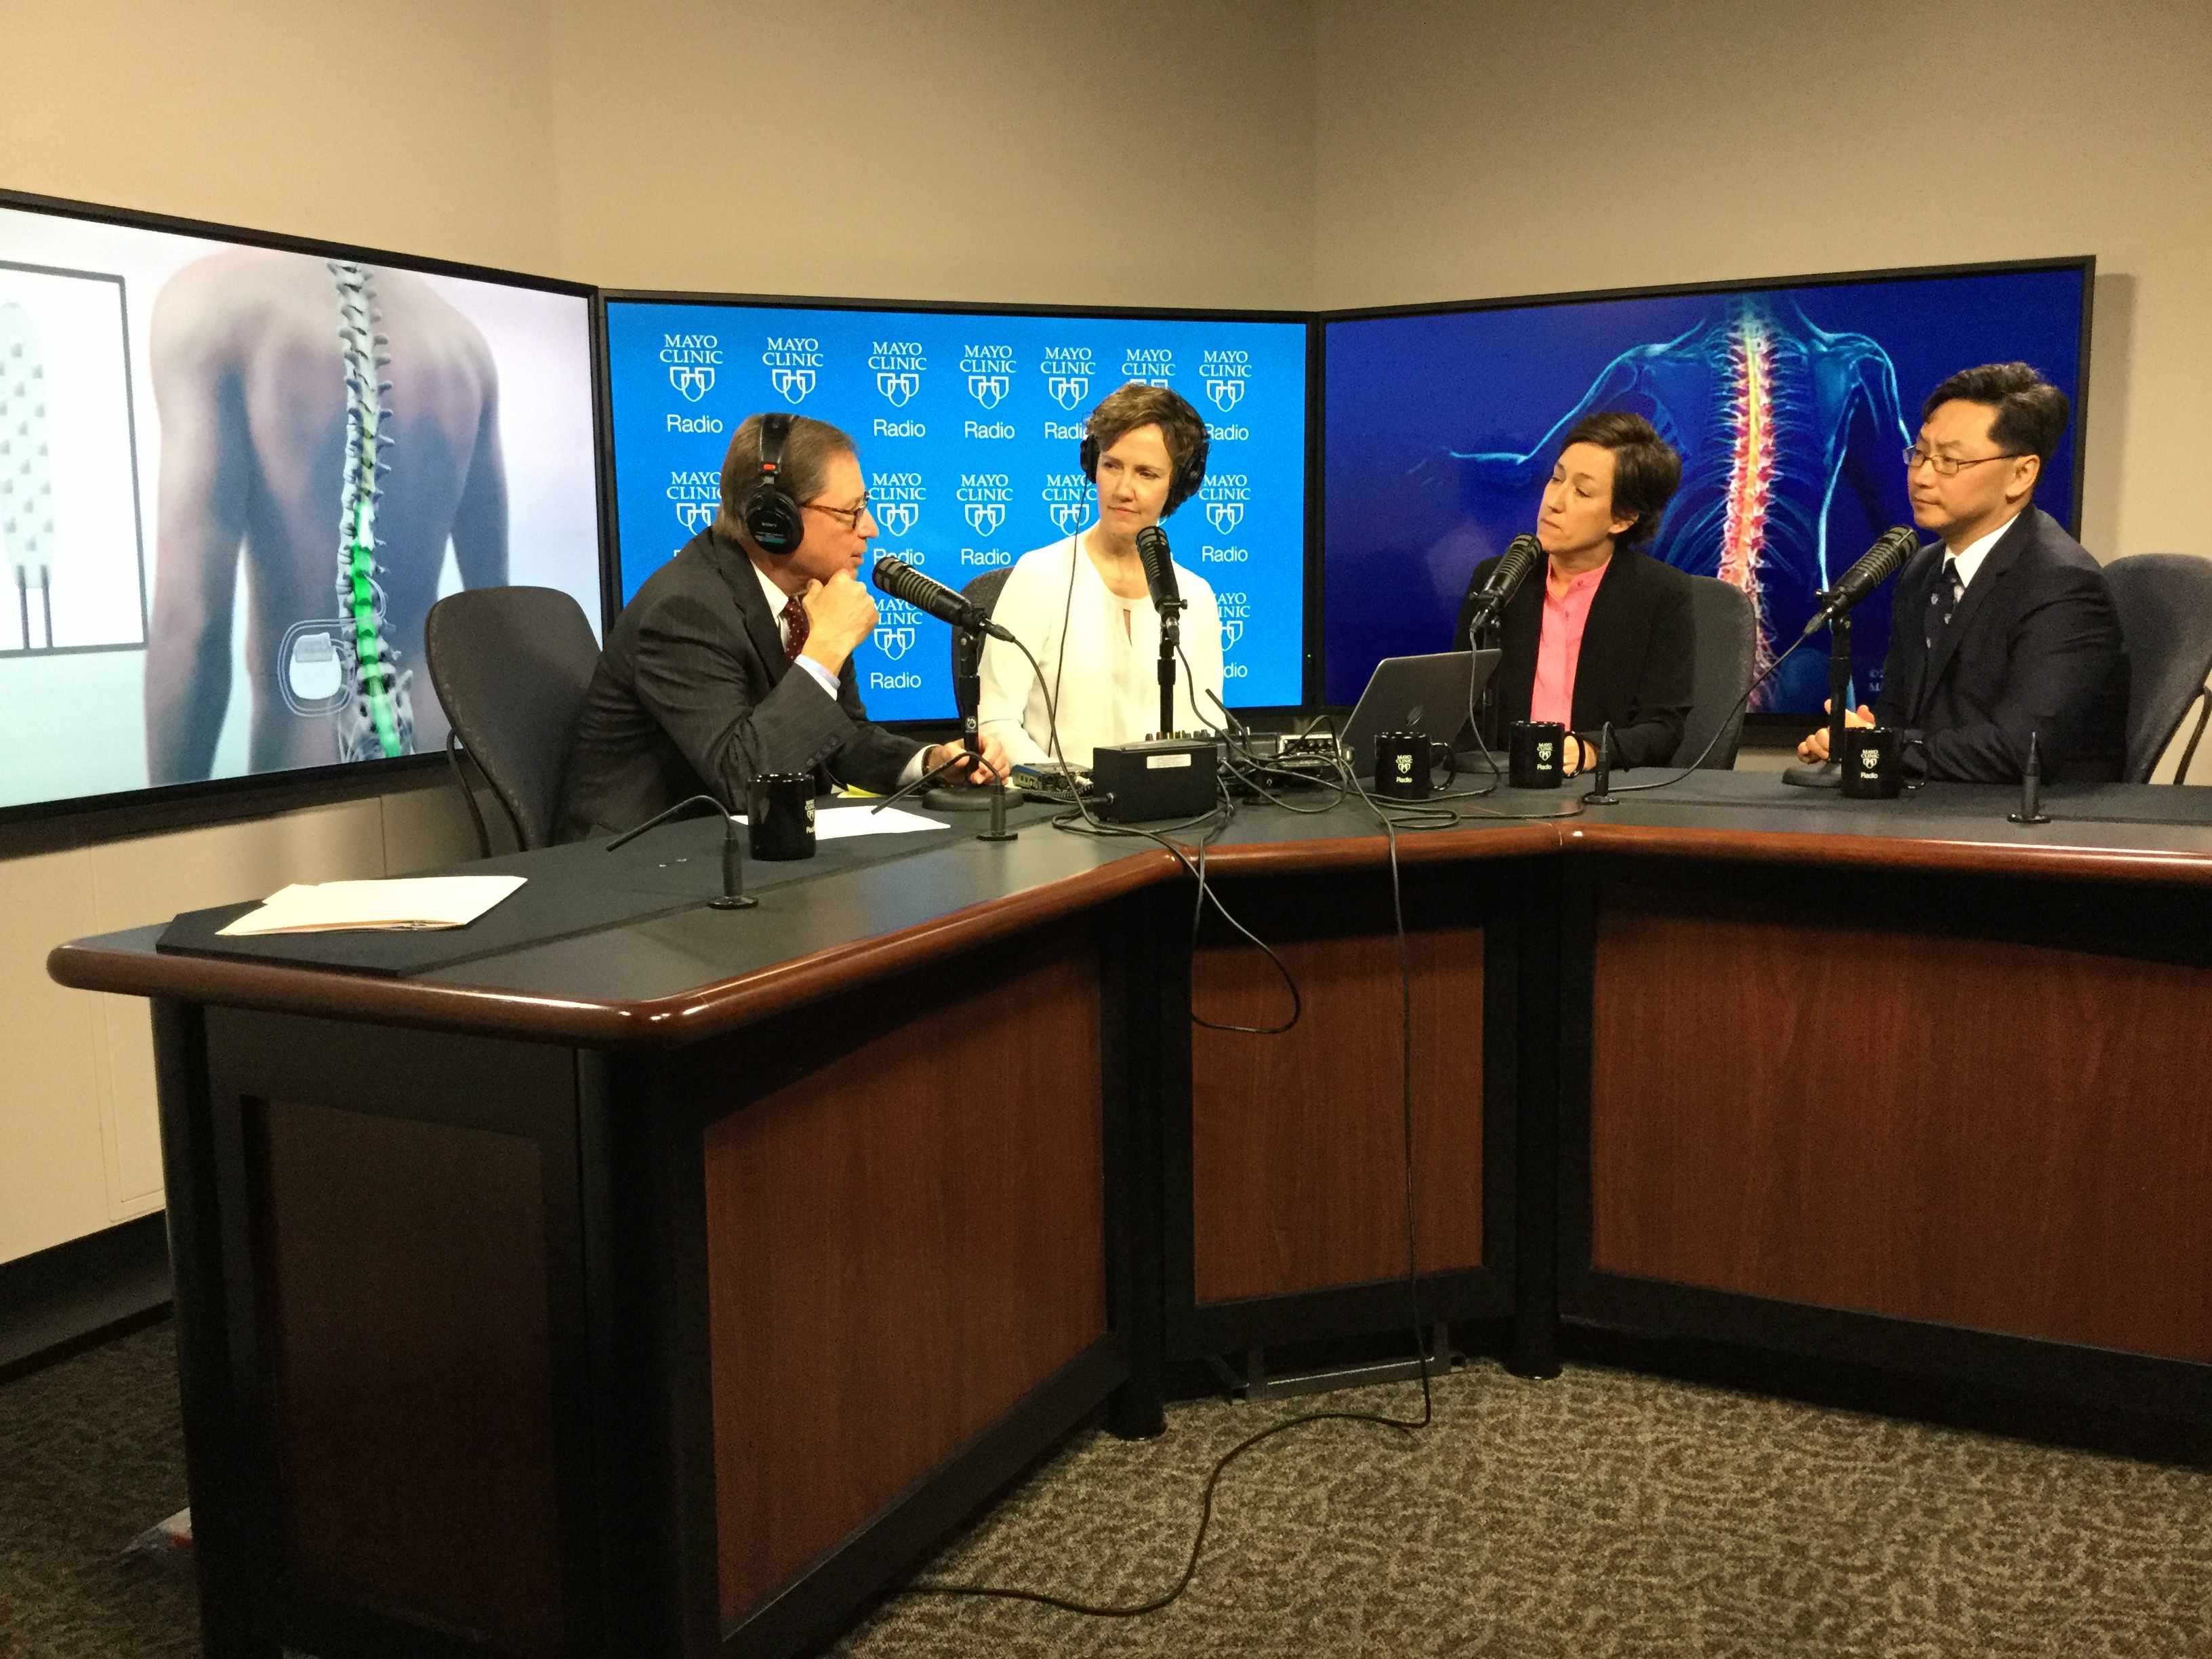 Dr. Kendall Lee and Dr. Kristin Zhao being interviewed on Mayo Clinic Radio